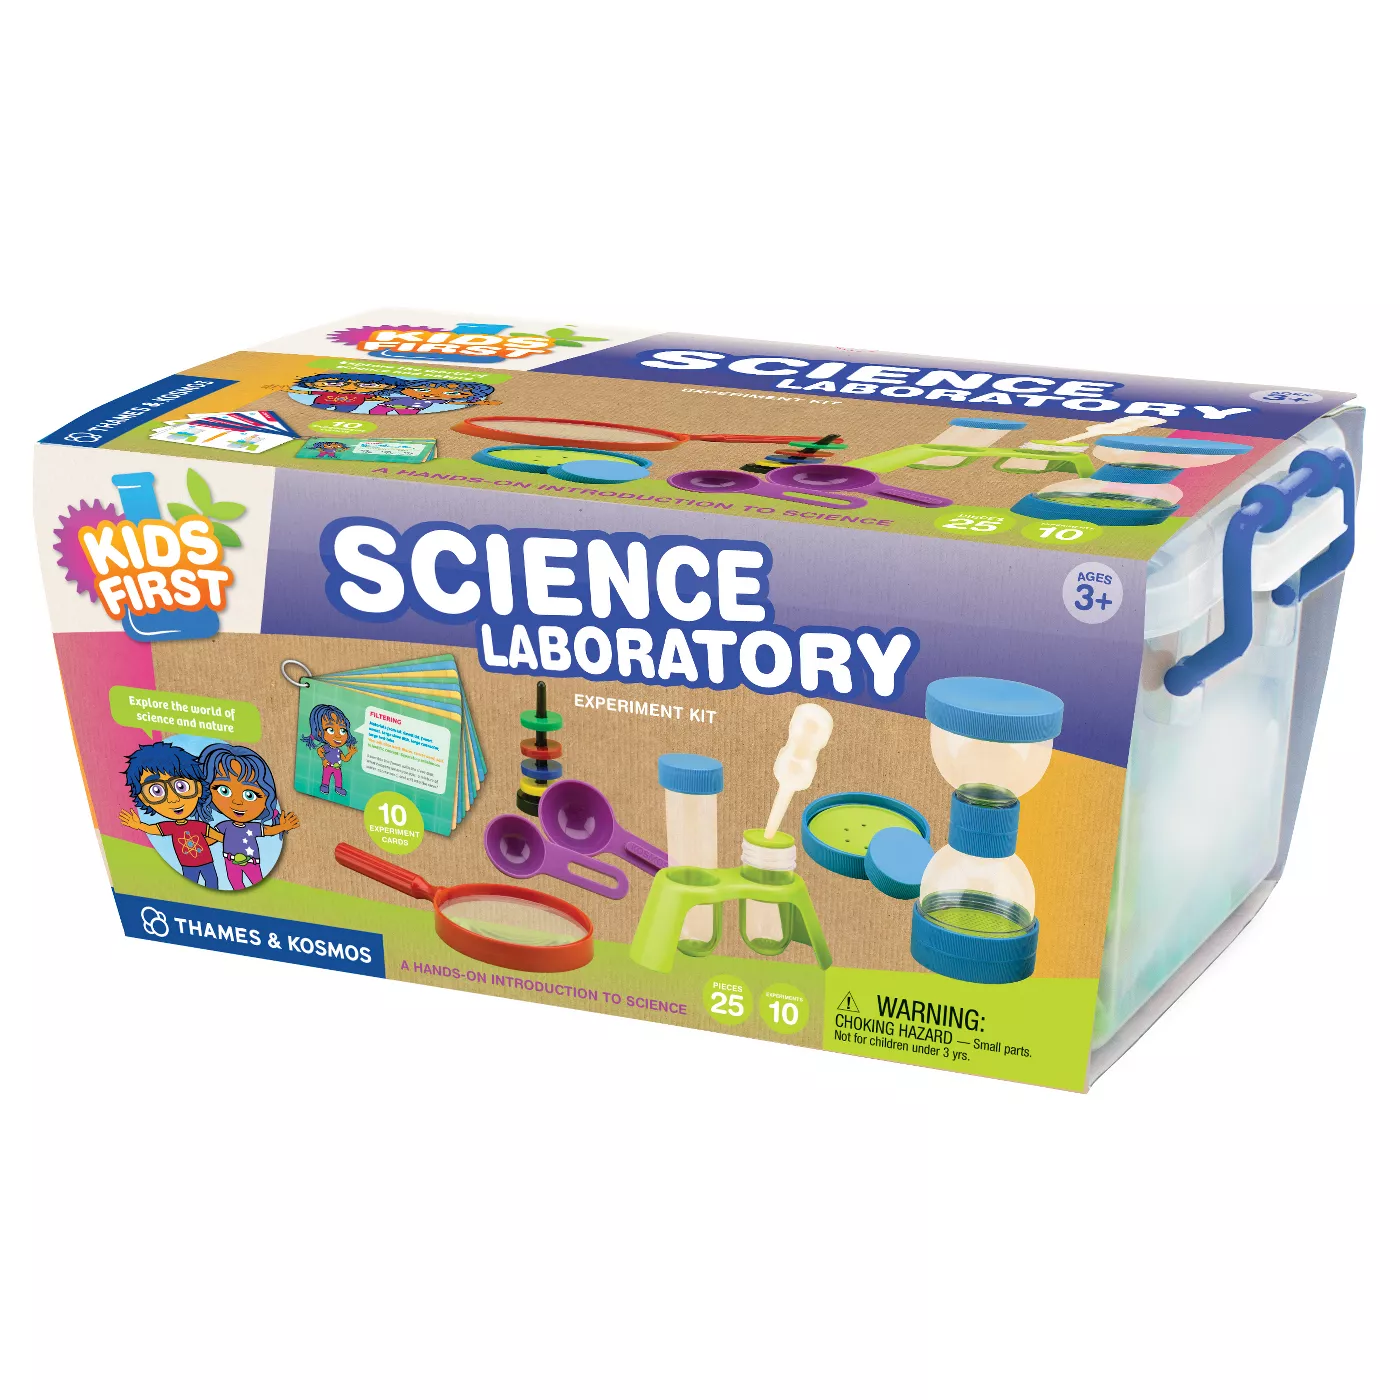 Thames & Kosmos Kid's First Science Laboratory - image 1 of 4